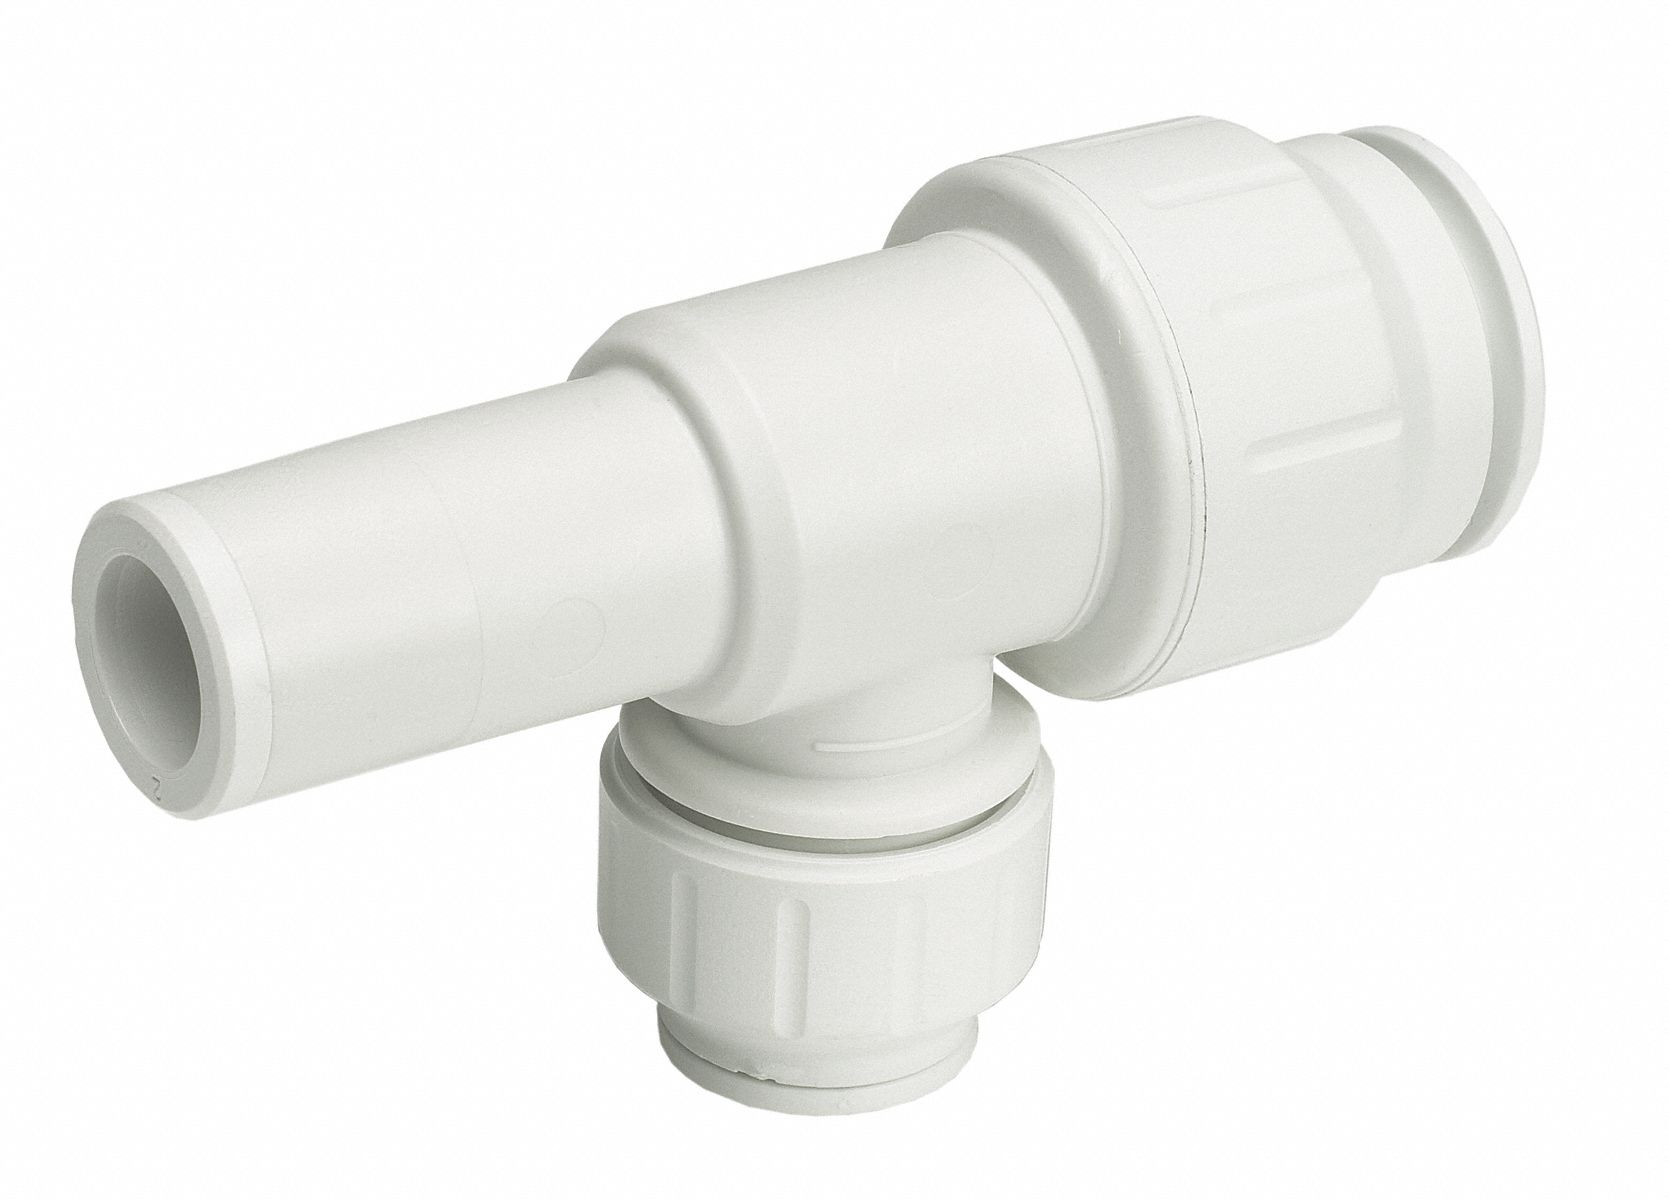 JOHN GUEST PEX Stackable Tee, 1/2" Tube Size   Push to Connect Tube Fittings   16T751|PEI532020